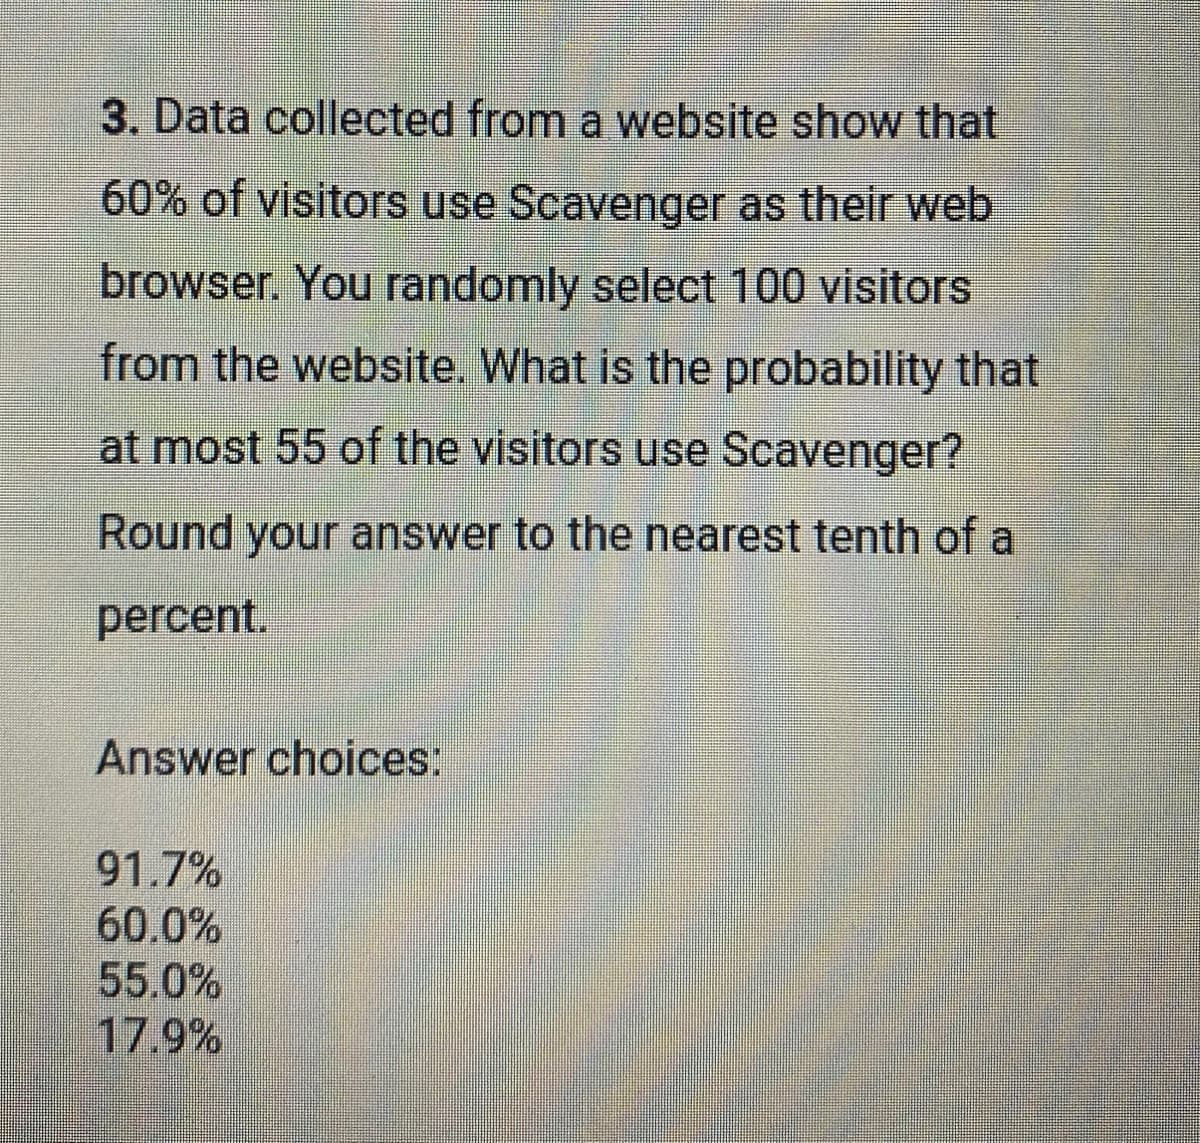 3. Data collected from a website show that
60% of visitors use Scavenger as their web
browser. You randomly select 100 visitors
from the website. What is the probability that
at most 55 of the visitors use Scavenger?
Round your answer to the nearest tenth of a
percent.
Answer choices:
91.7%
60.0%
55.0%
17.9%